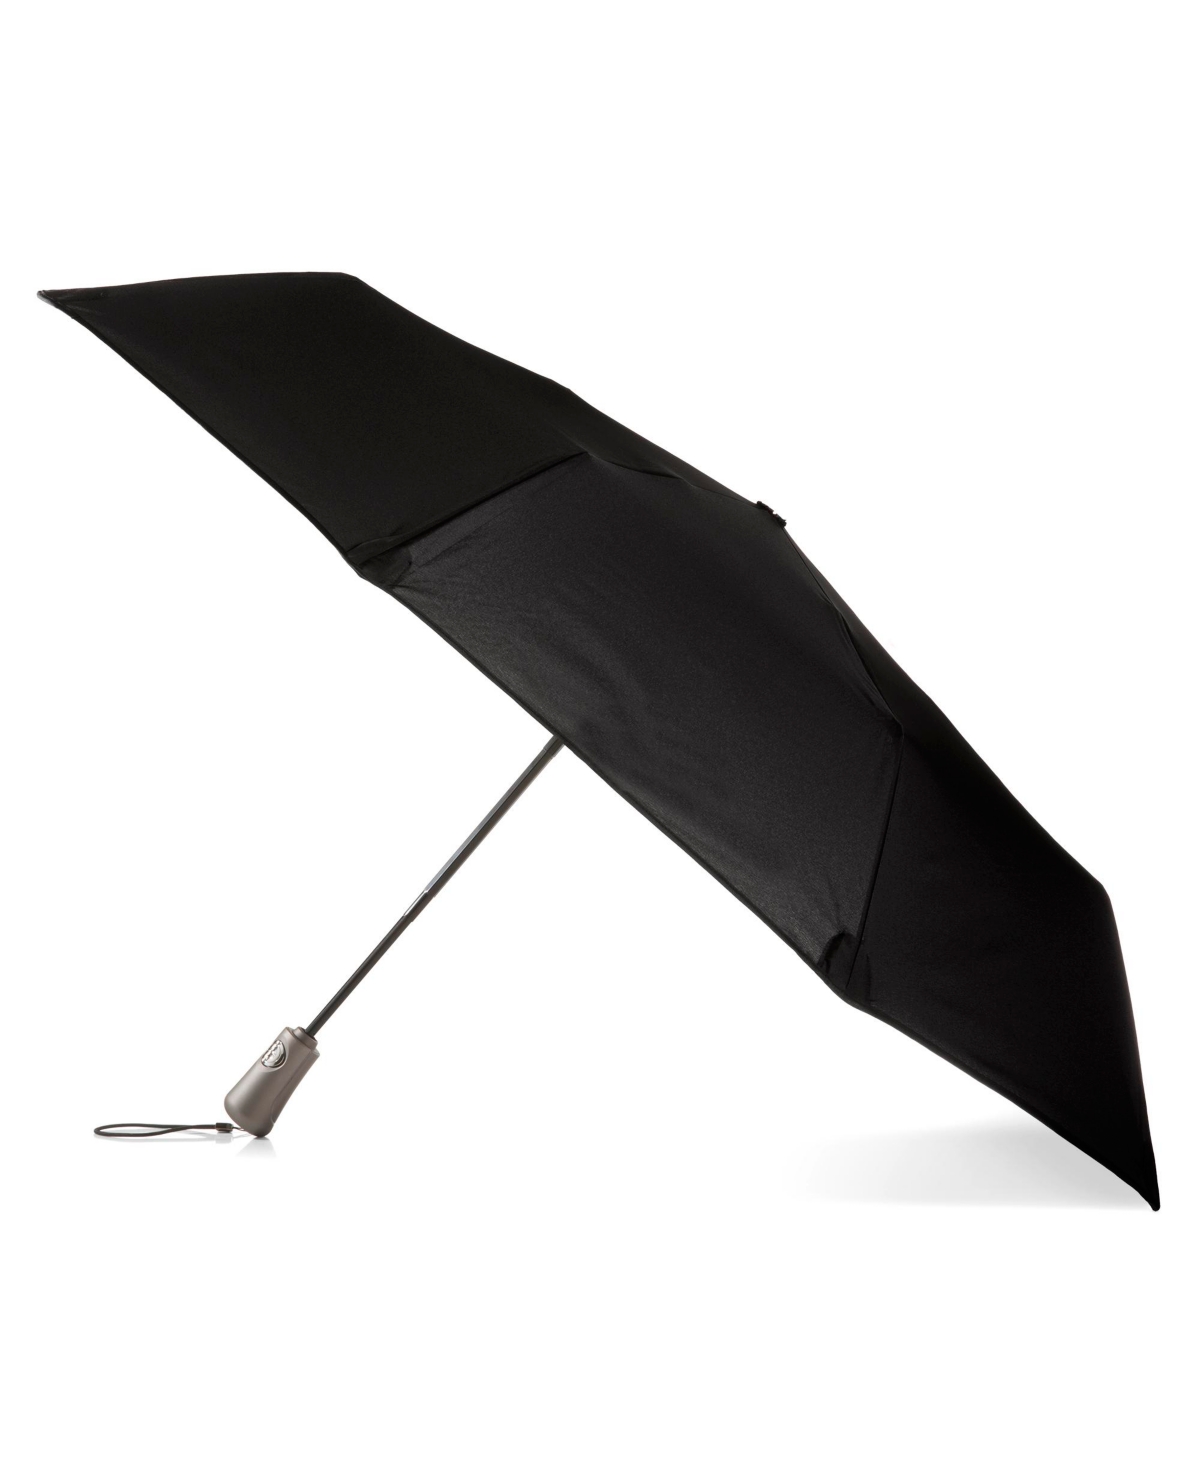 Totes Total Protection Auto Open And Close 3-section Umbrella In Black